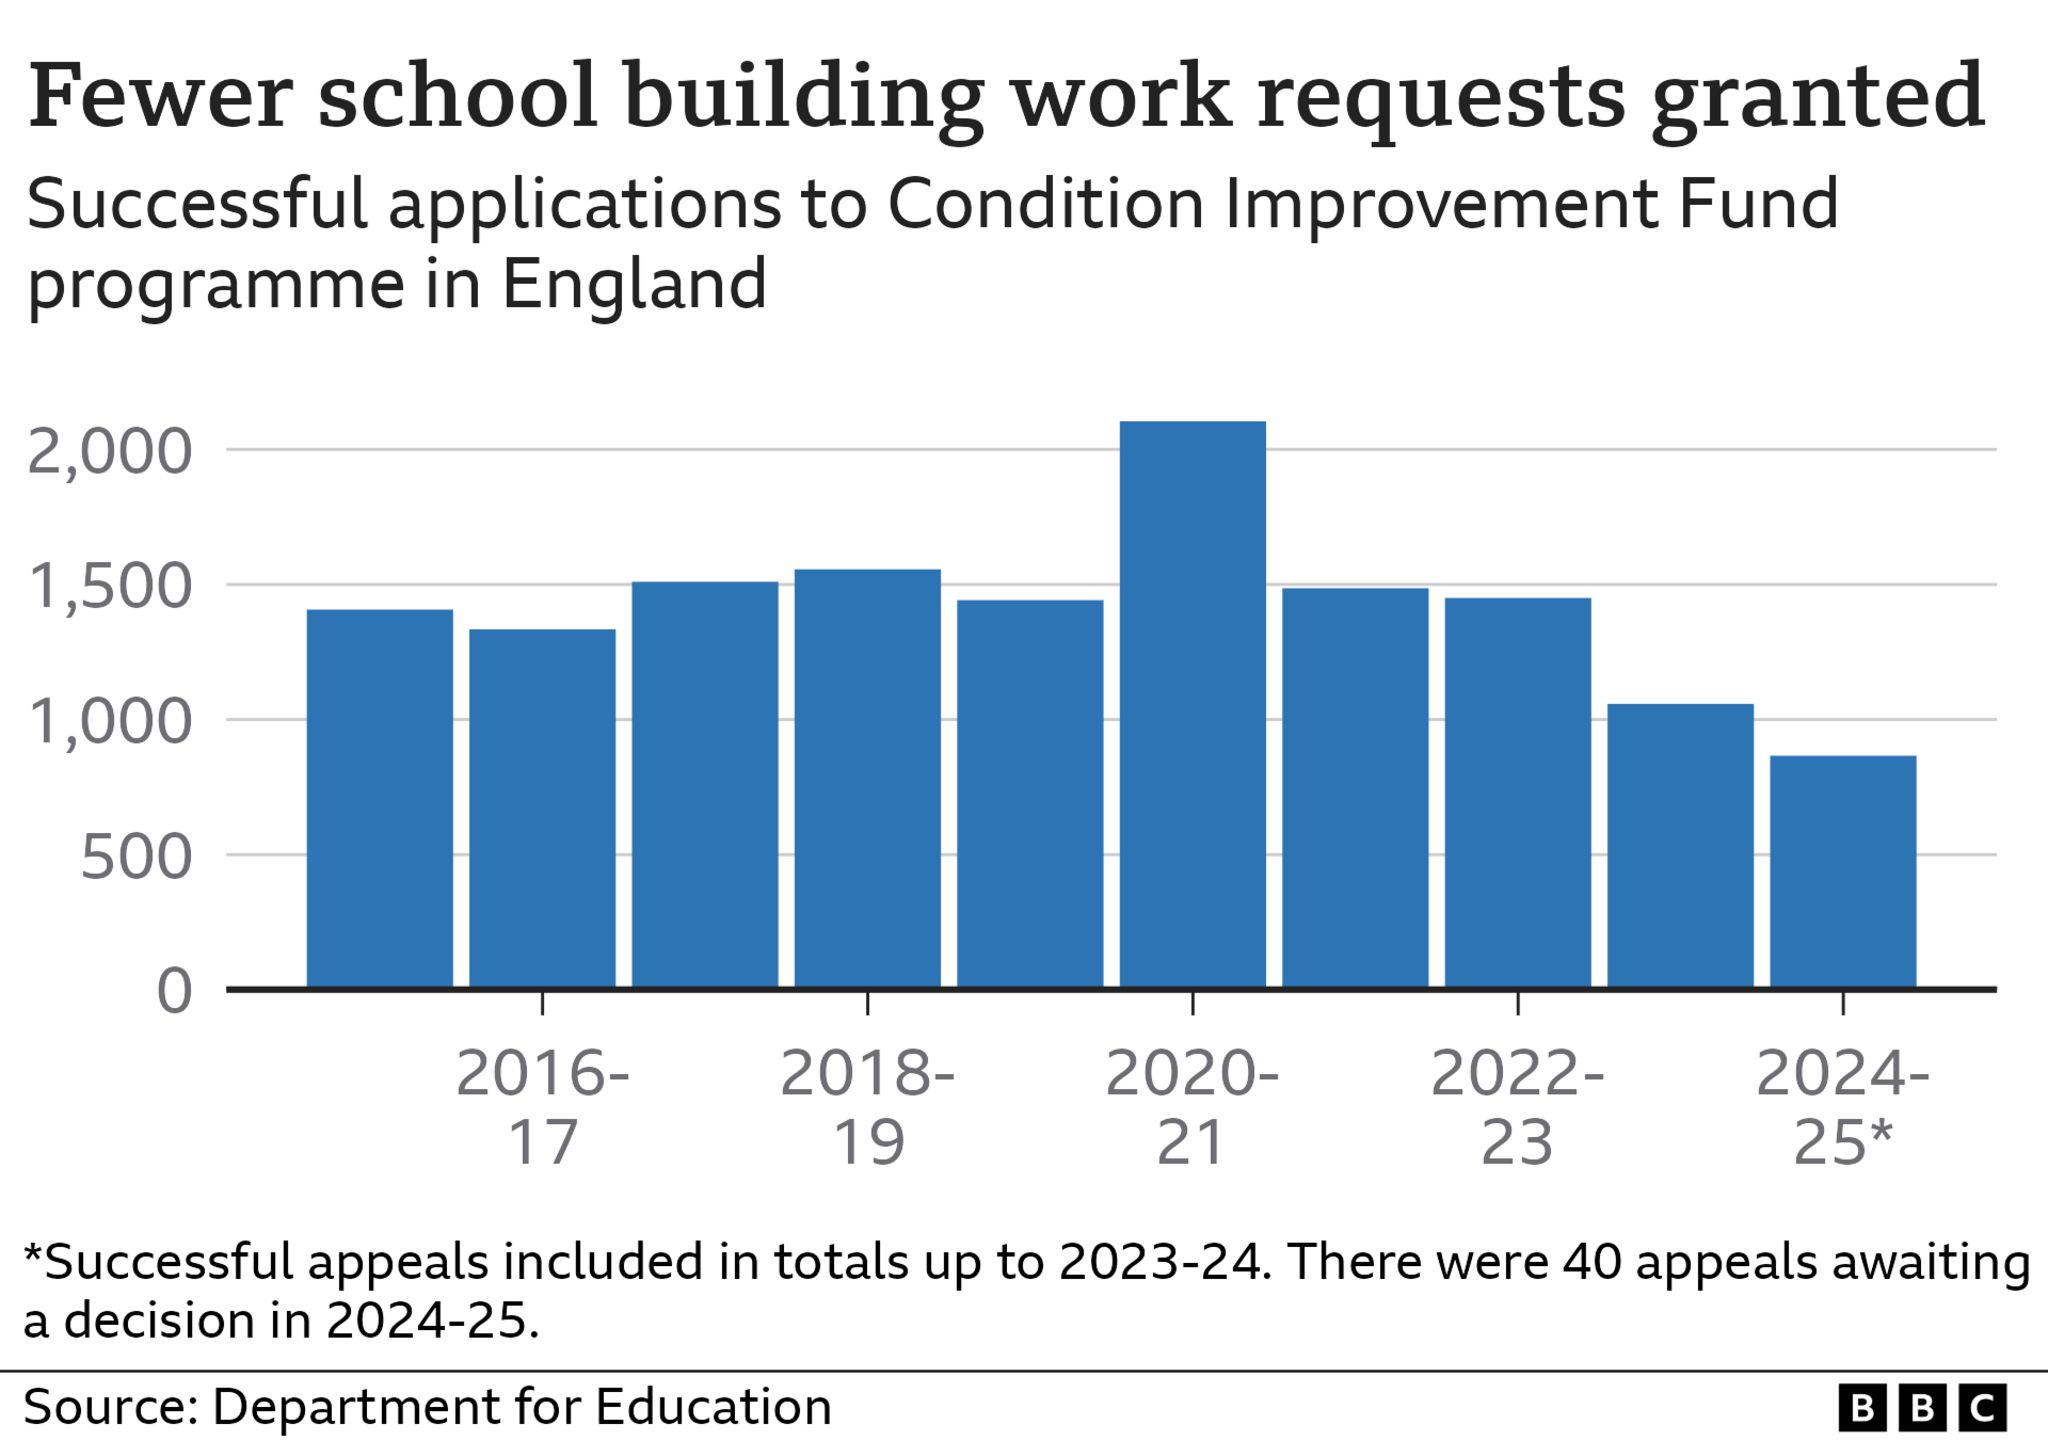 Chart demonstrating that fewer school building work requests have been granted for 2024-25, down to 866 projects from a peak of 2,104 in 2020-21.